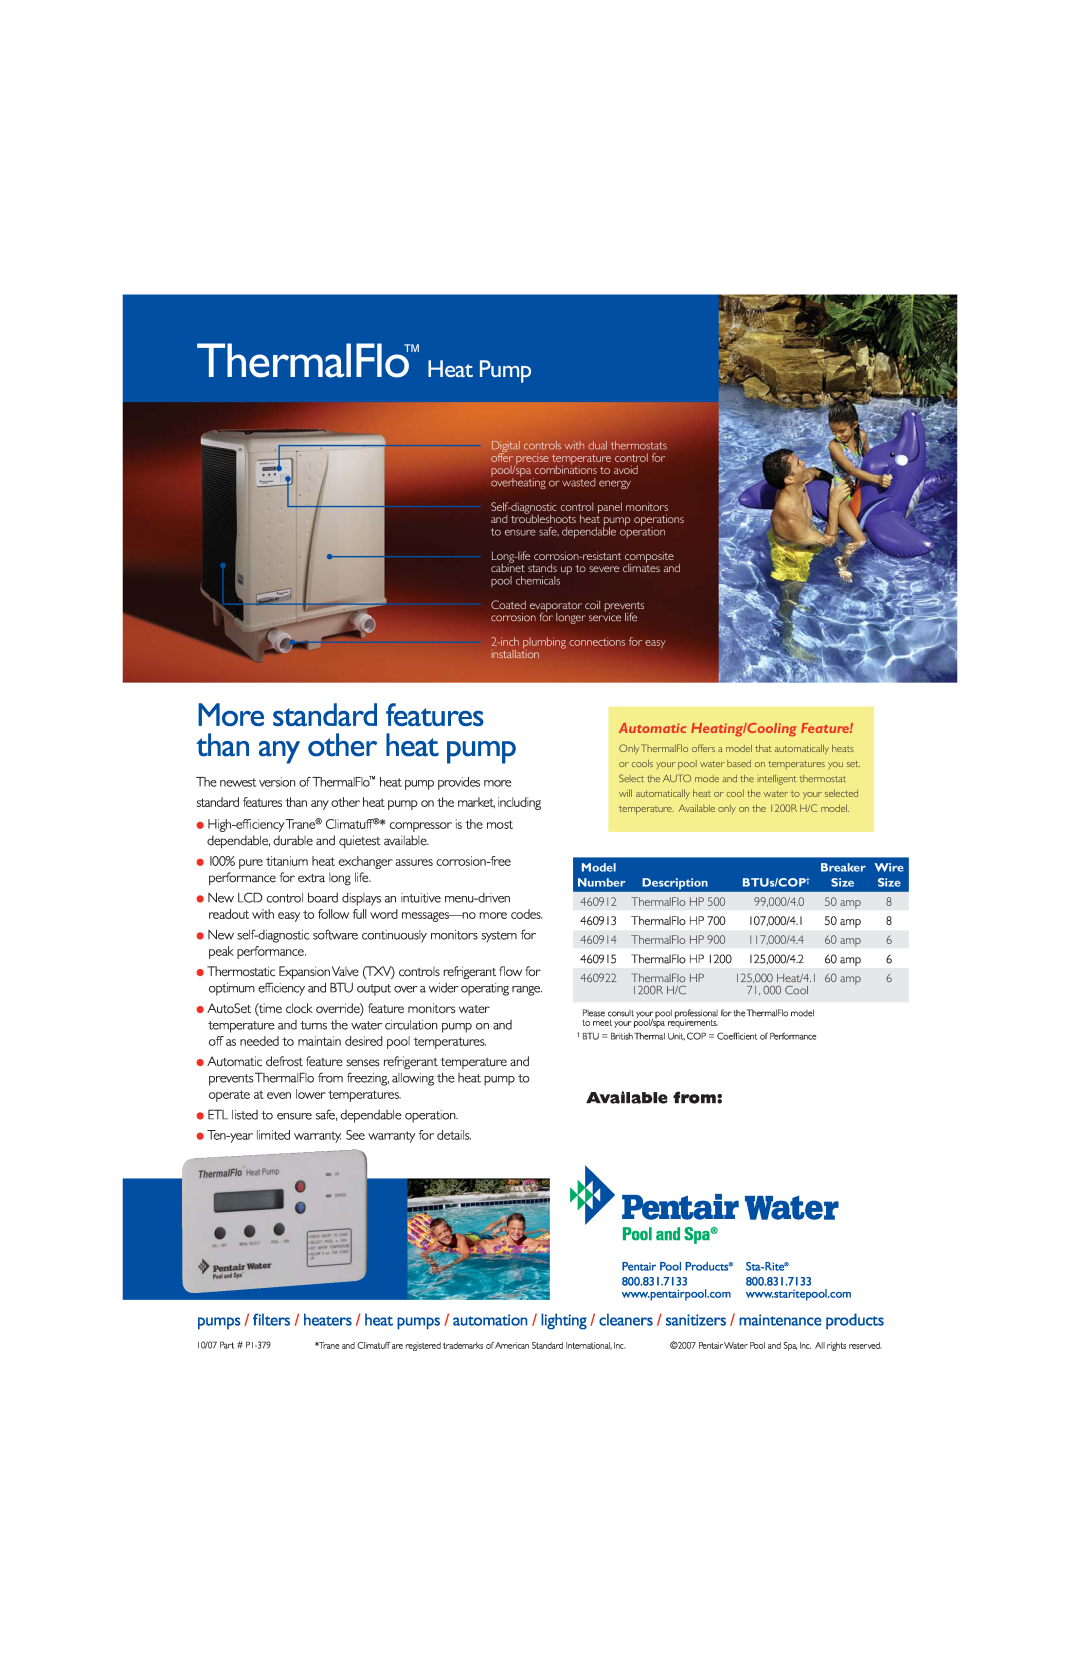 Pentair 1200R H/C manual ThermalFlo Heat Pump, Available from, More standard features than any other heat pump 